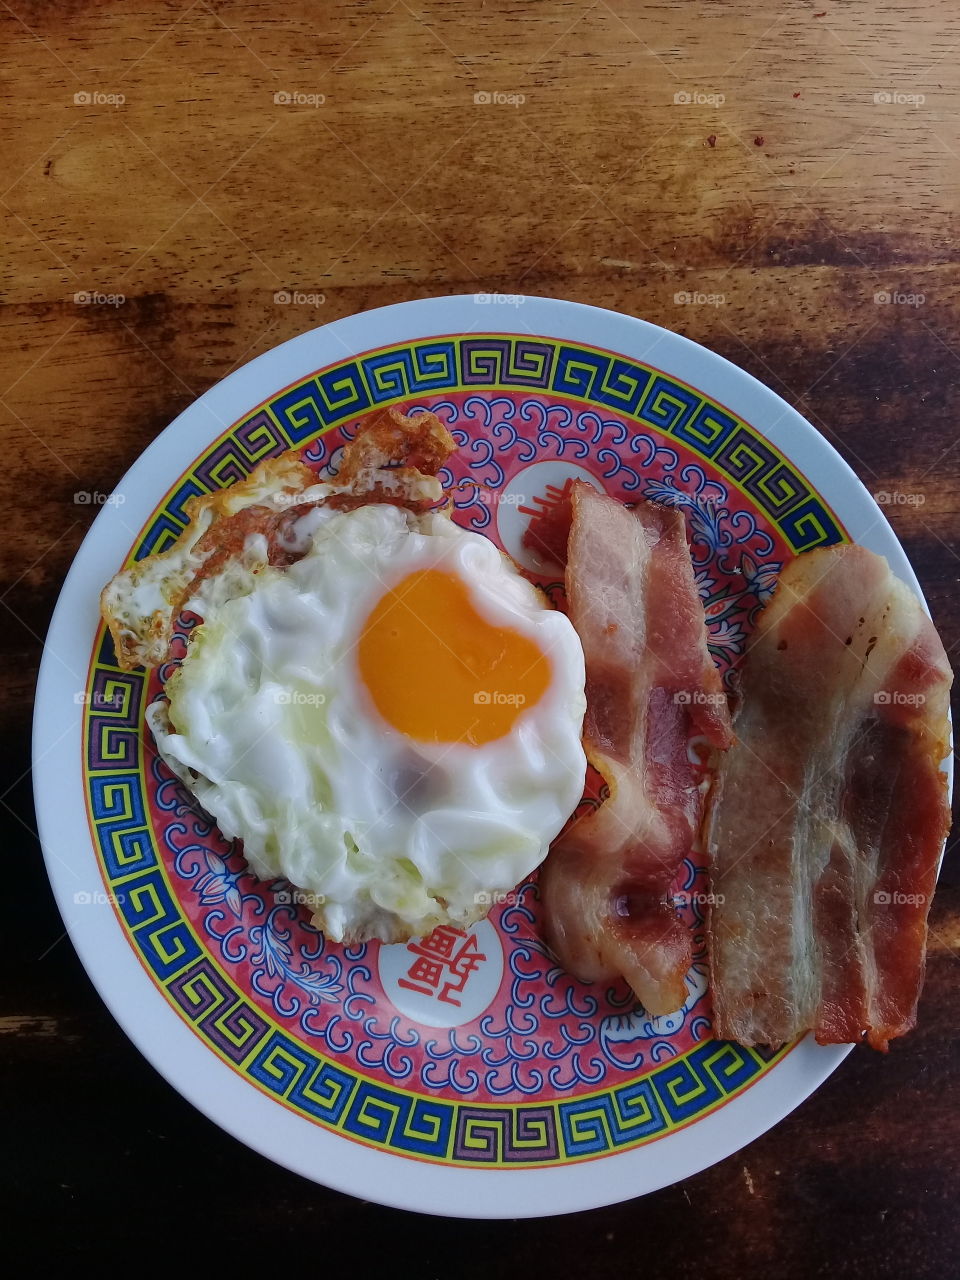 Fried Egg with Bacon